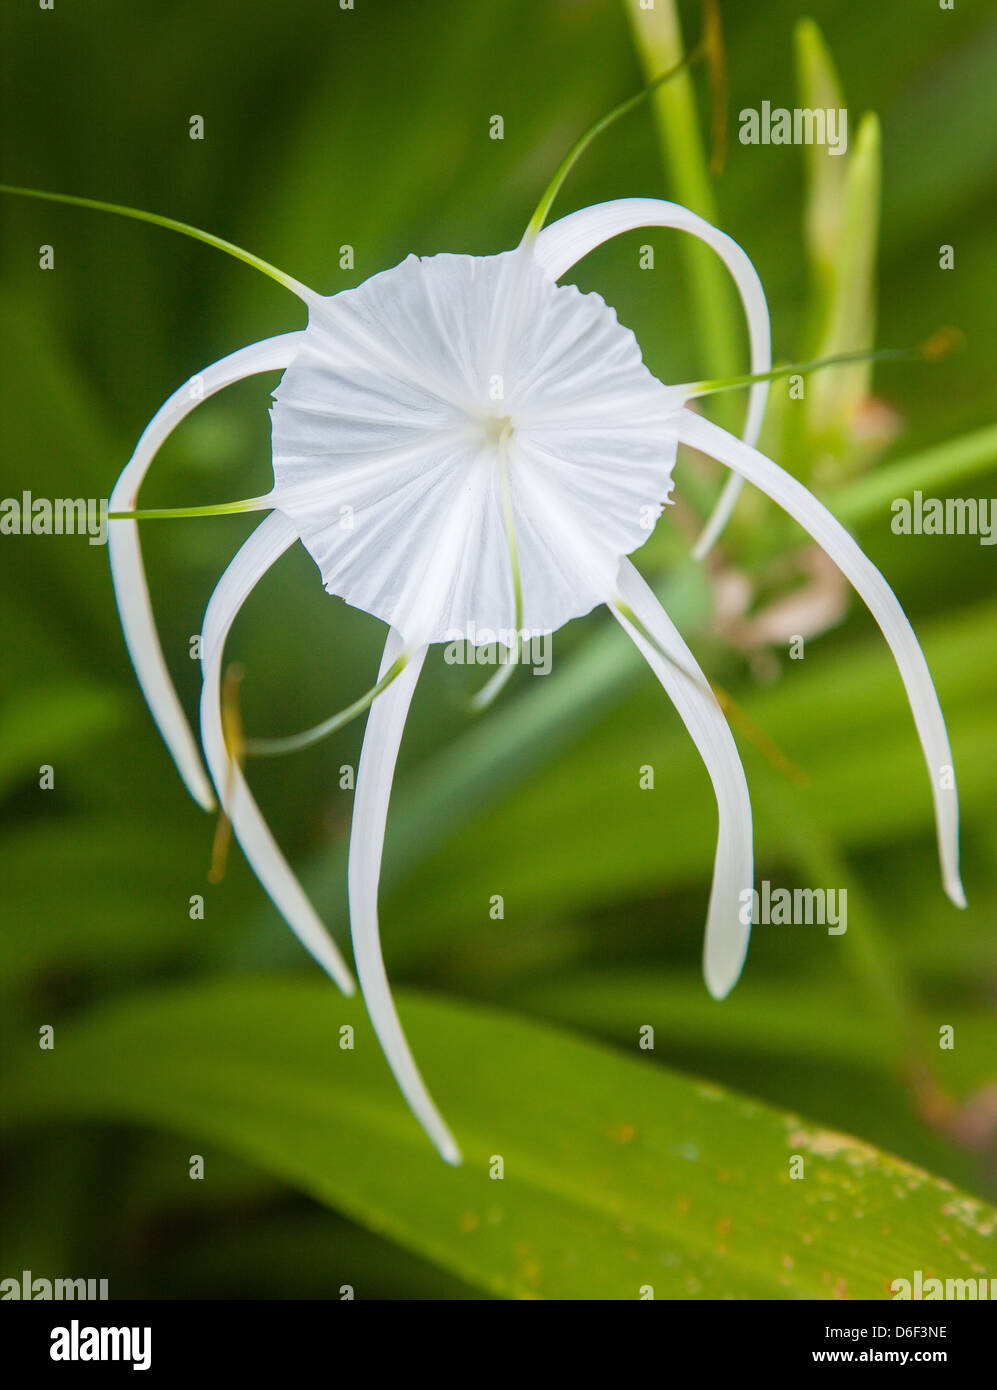 Trumpet shaped tasseled flower of the white lily Crinum asiaticum in a garden in Sabah Borneo Stock Photo